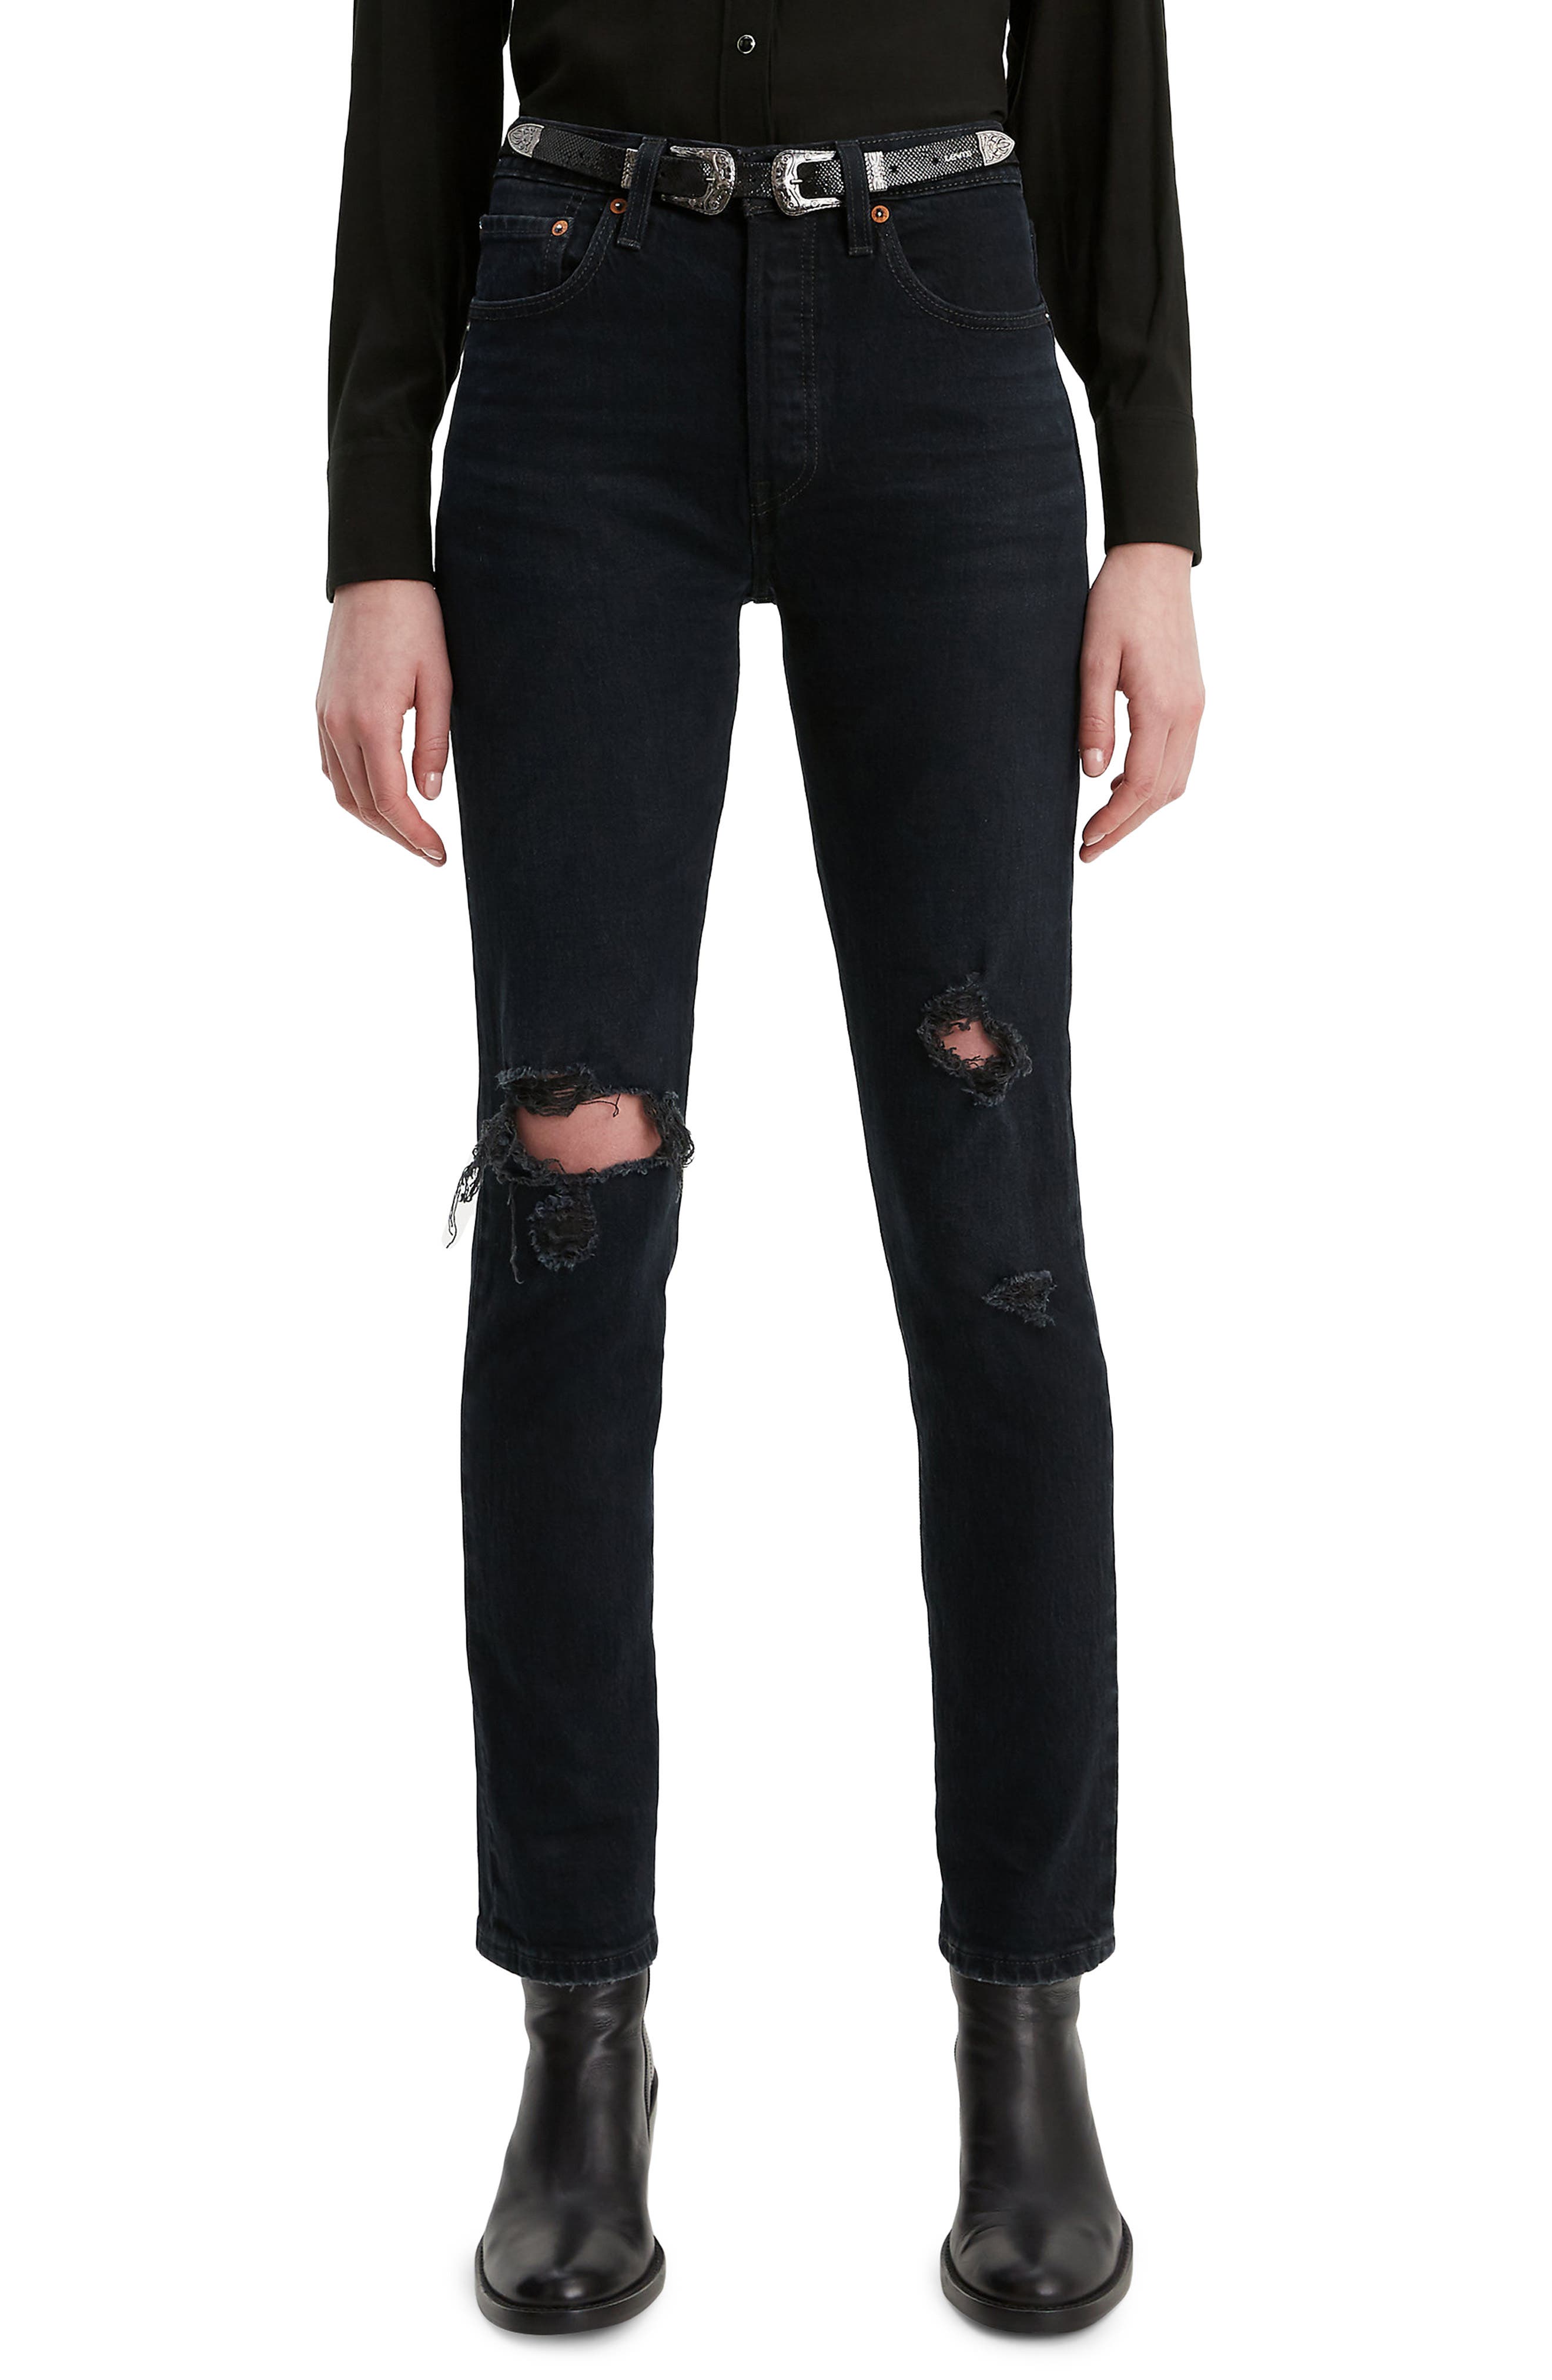 levis 501 ripped skinny jeans